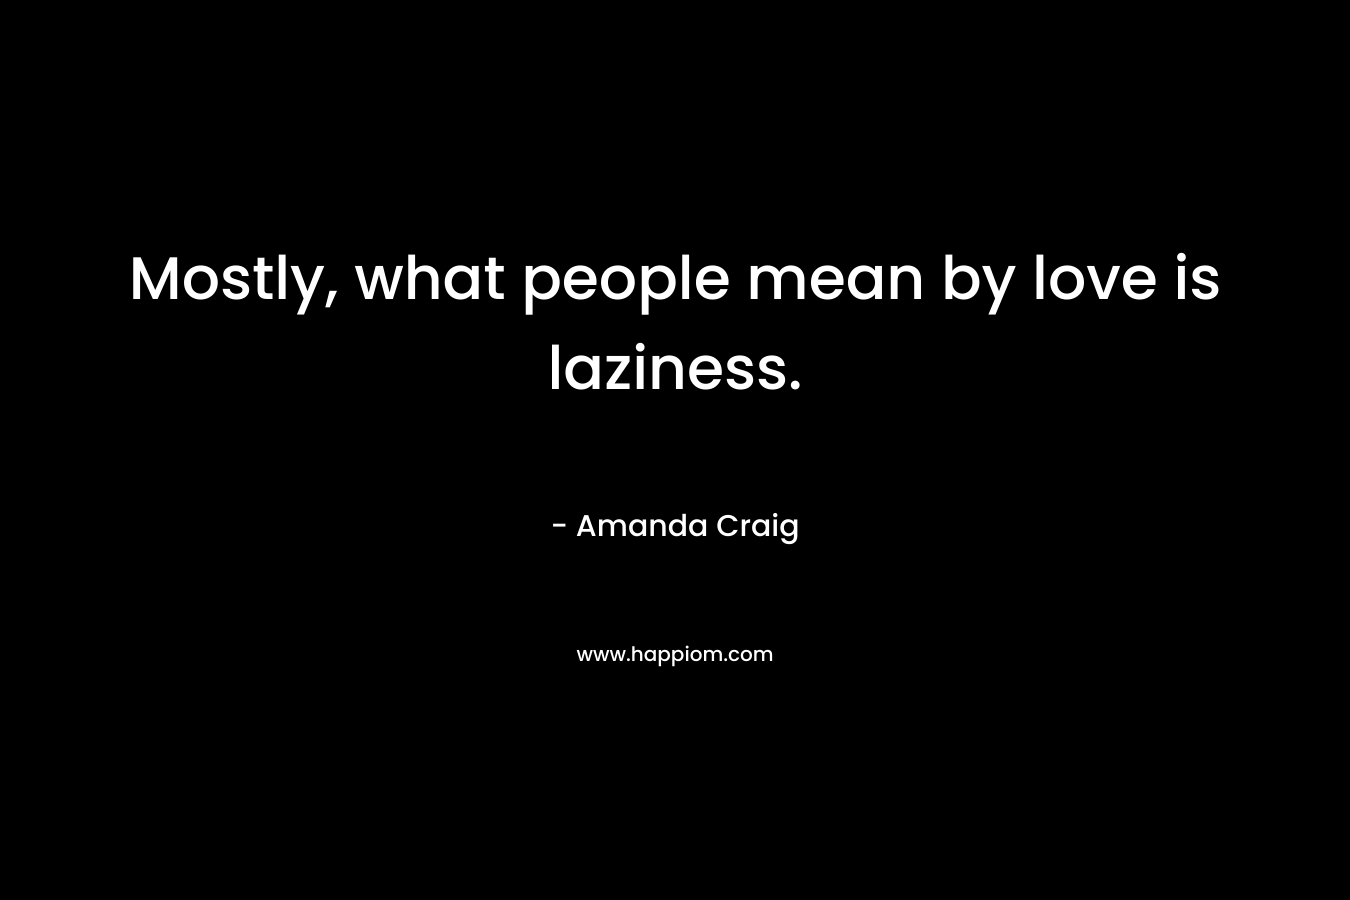 Mostly, what people mean by love is laziness. – Amanda Craig